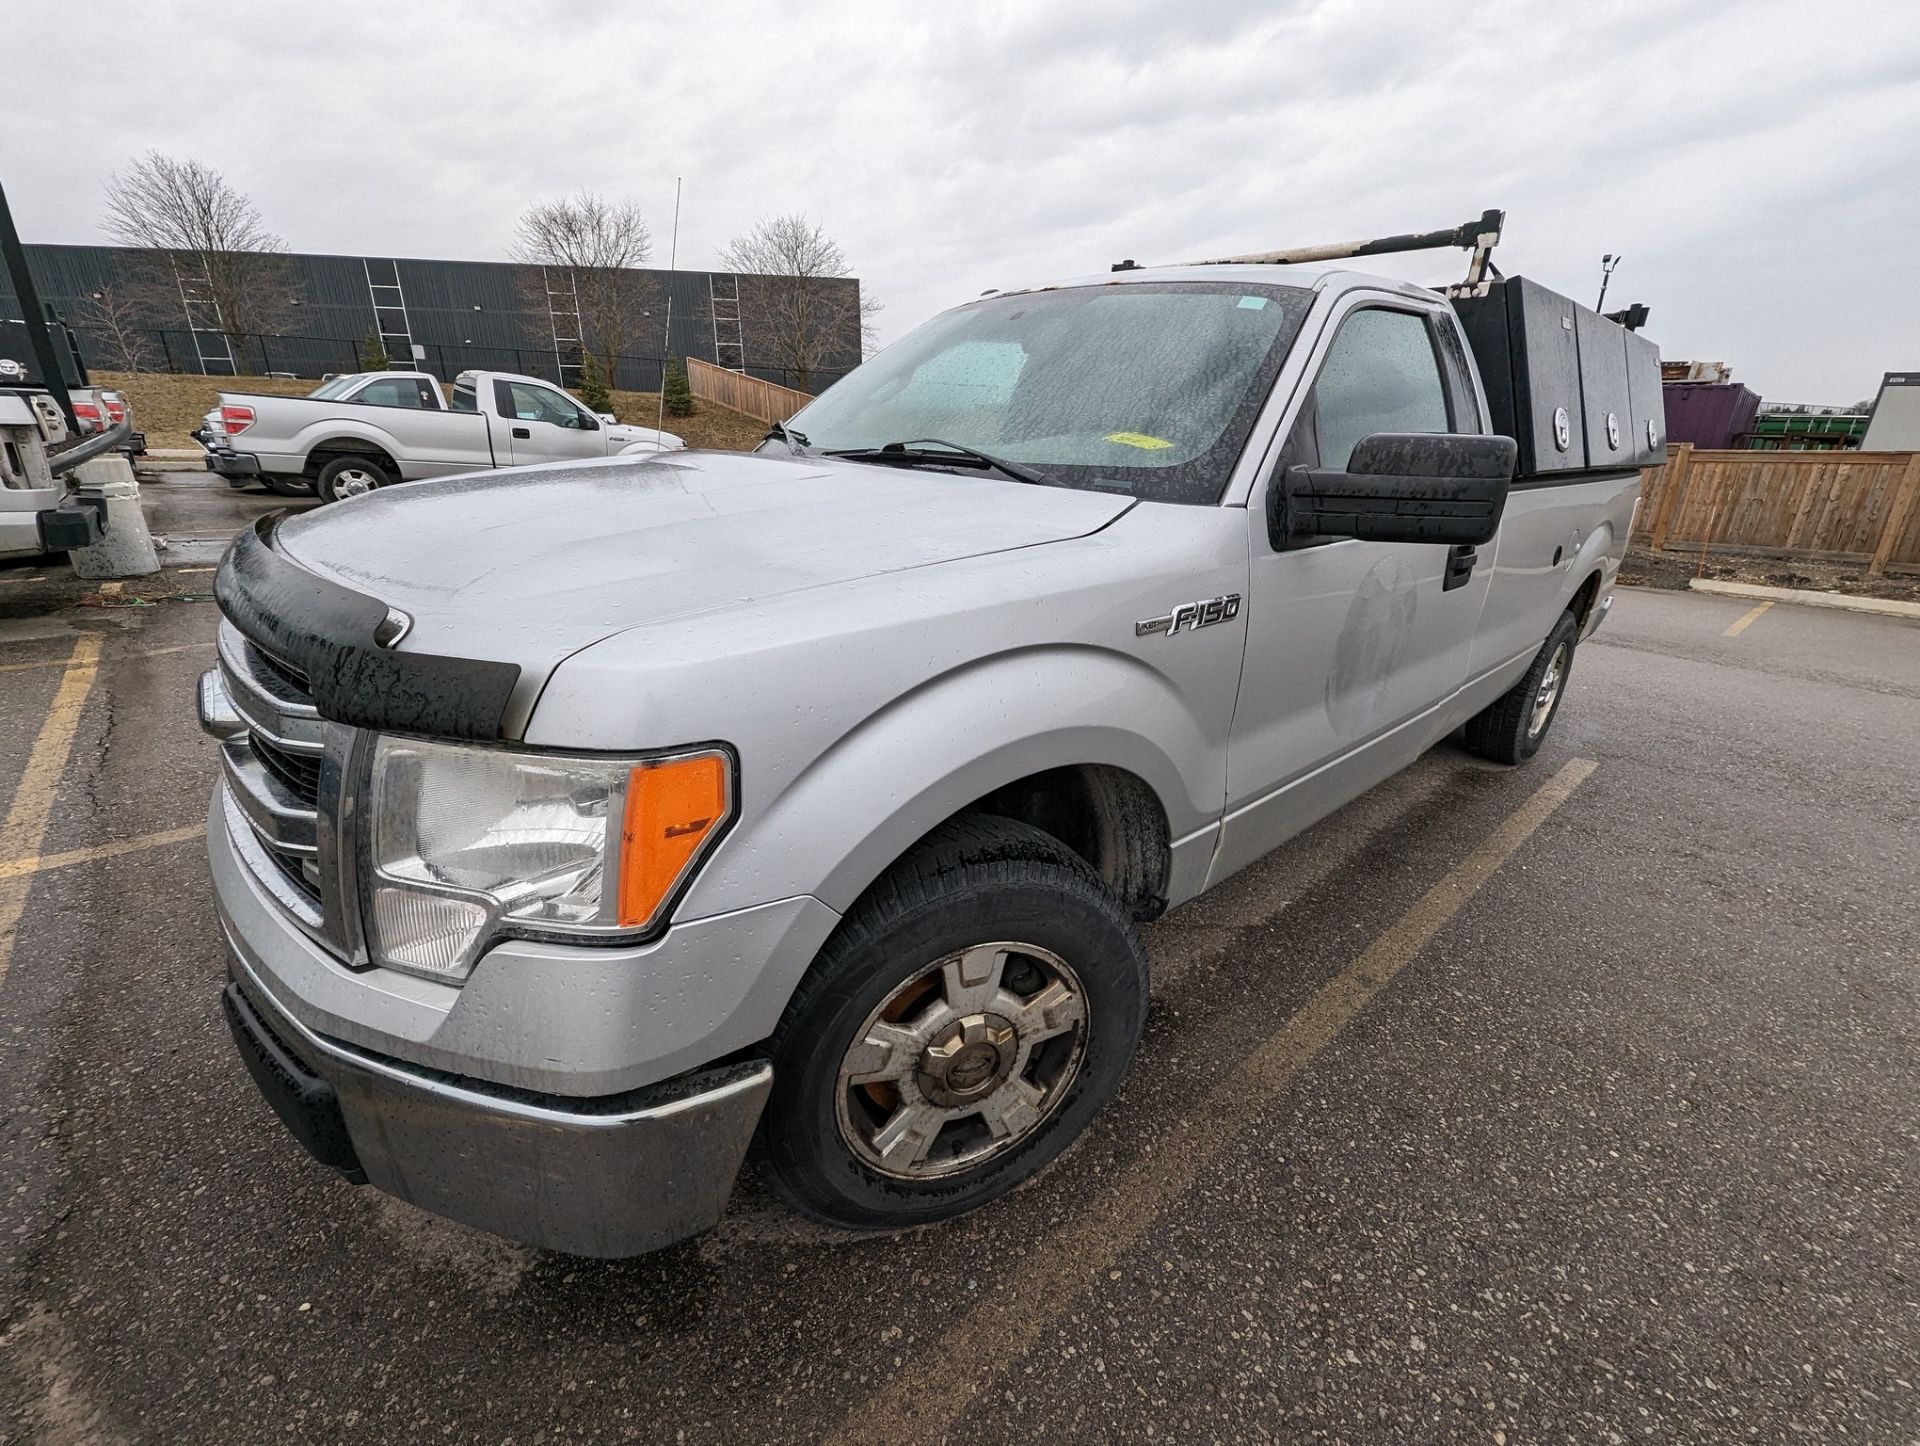 2013 FORD F150 XLT PICKUP TRUCK, VIN# 1FTNF1CF2DKE53797, APPROX. 411,982KMS (NO BLACK TOOL BOXES)